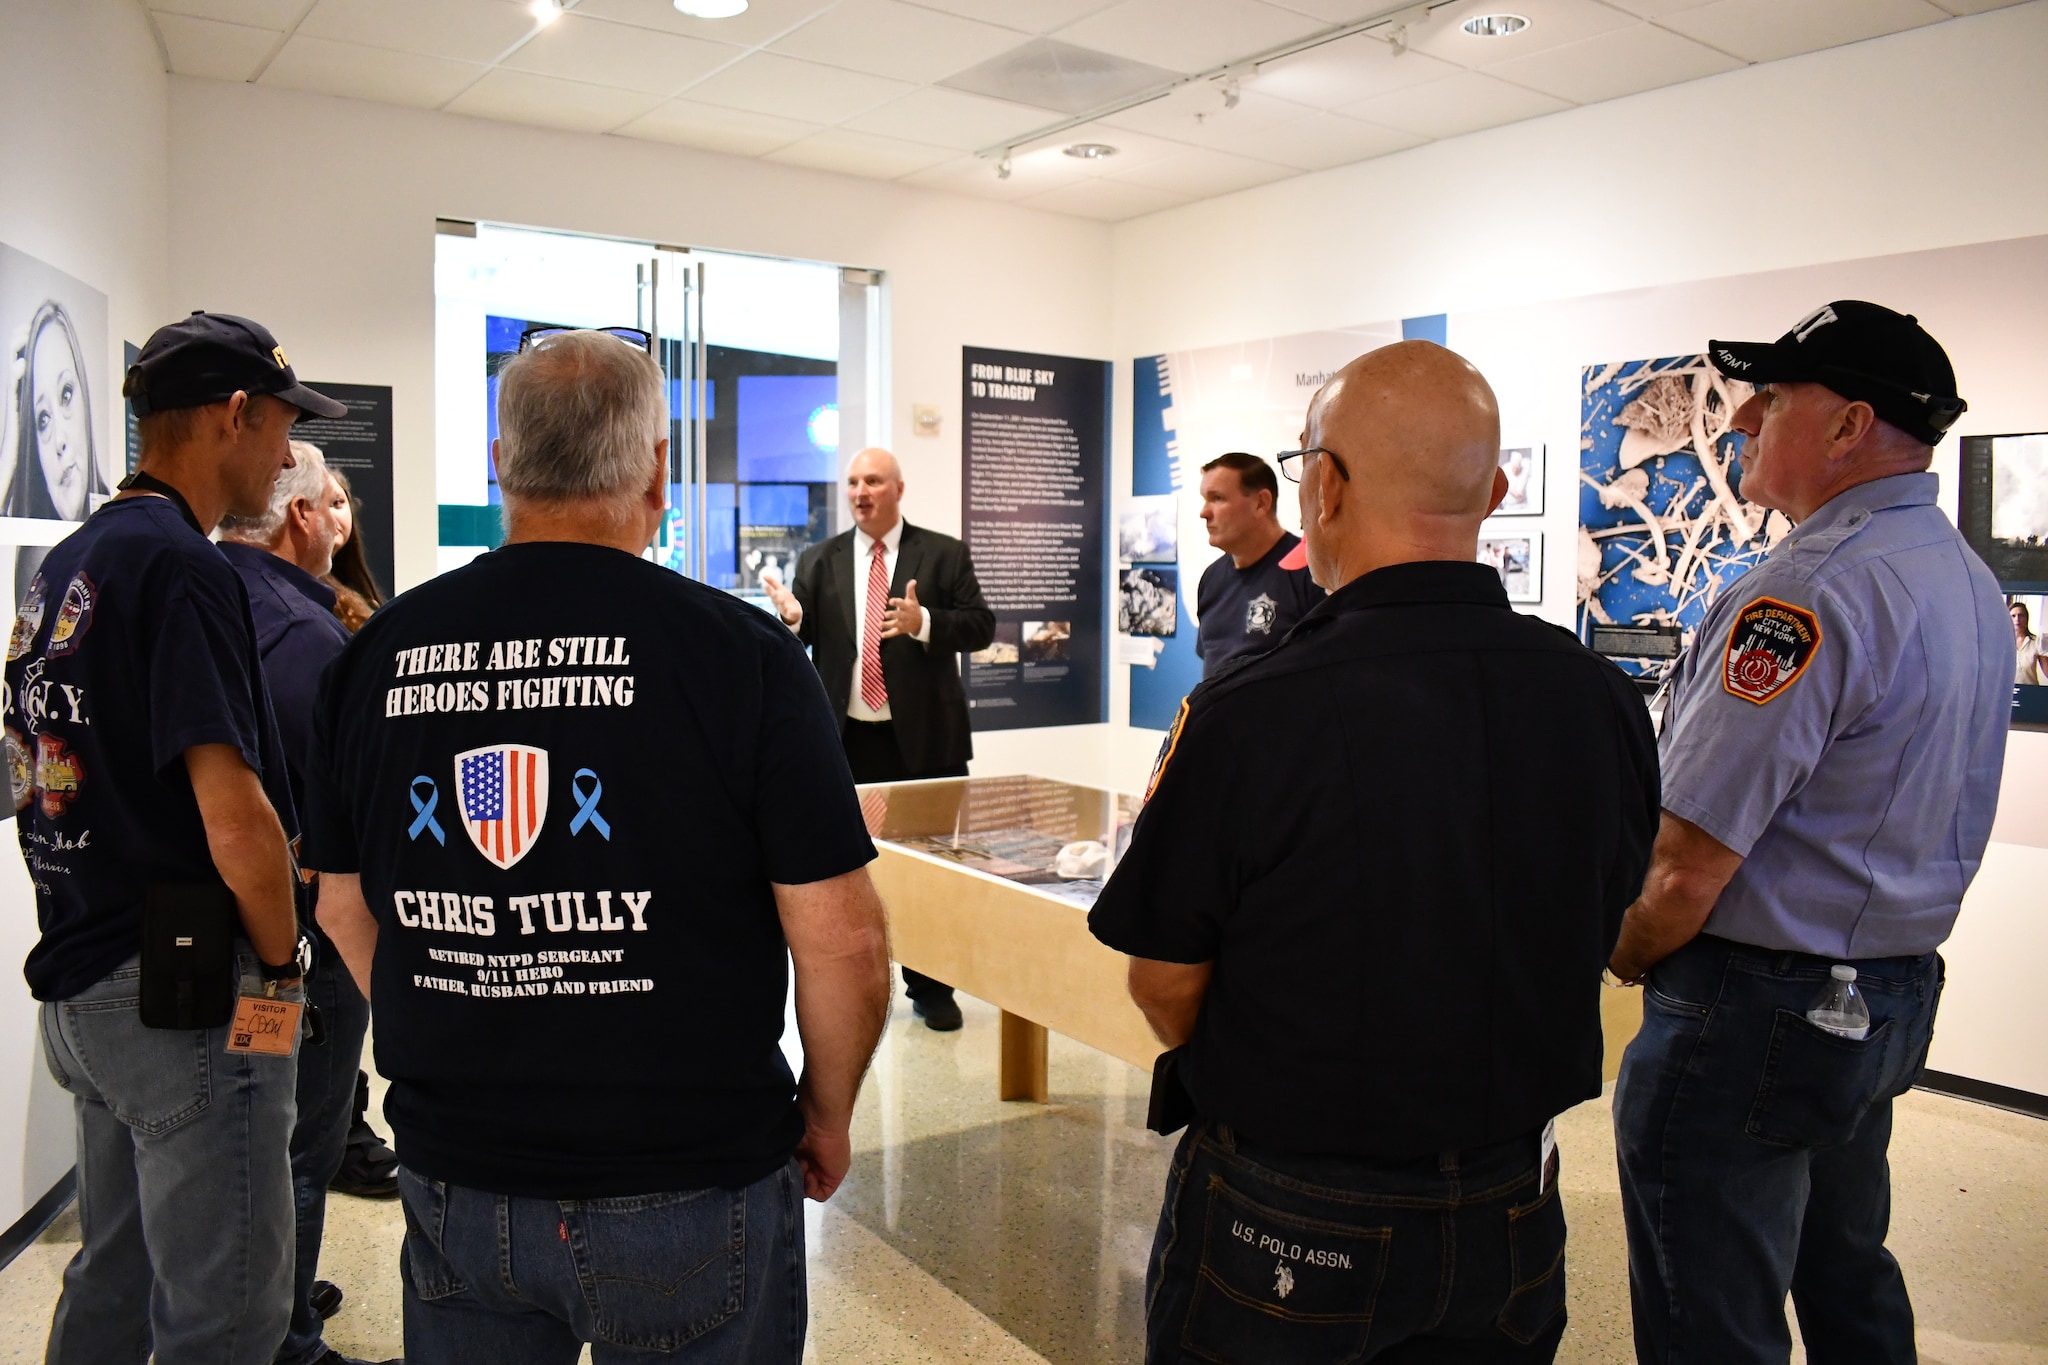 The NYC Shields of Georgia, a group of 9/11 responders led by retired NYC firefighter Tim Murphy, gathered around an exhibition piece at the Health Effects of 9/11 exhibition in the CDC museum. In a moment of solidarity, they listen intently to a speaker, embodying the shared support that defines their mission. 